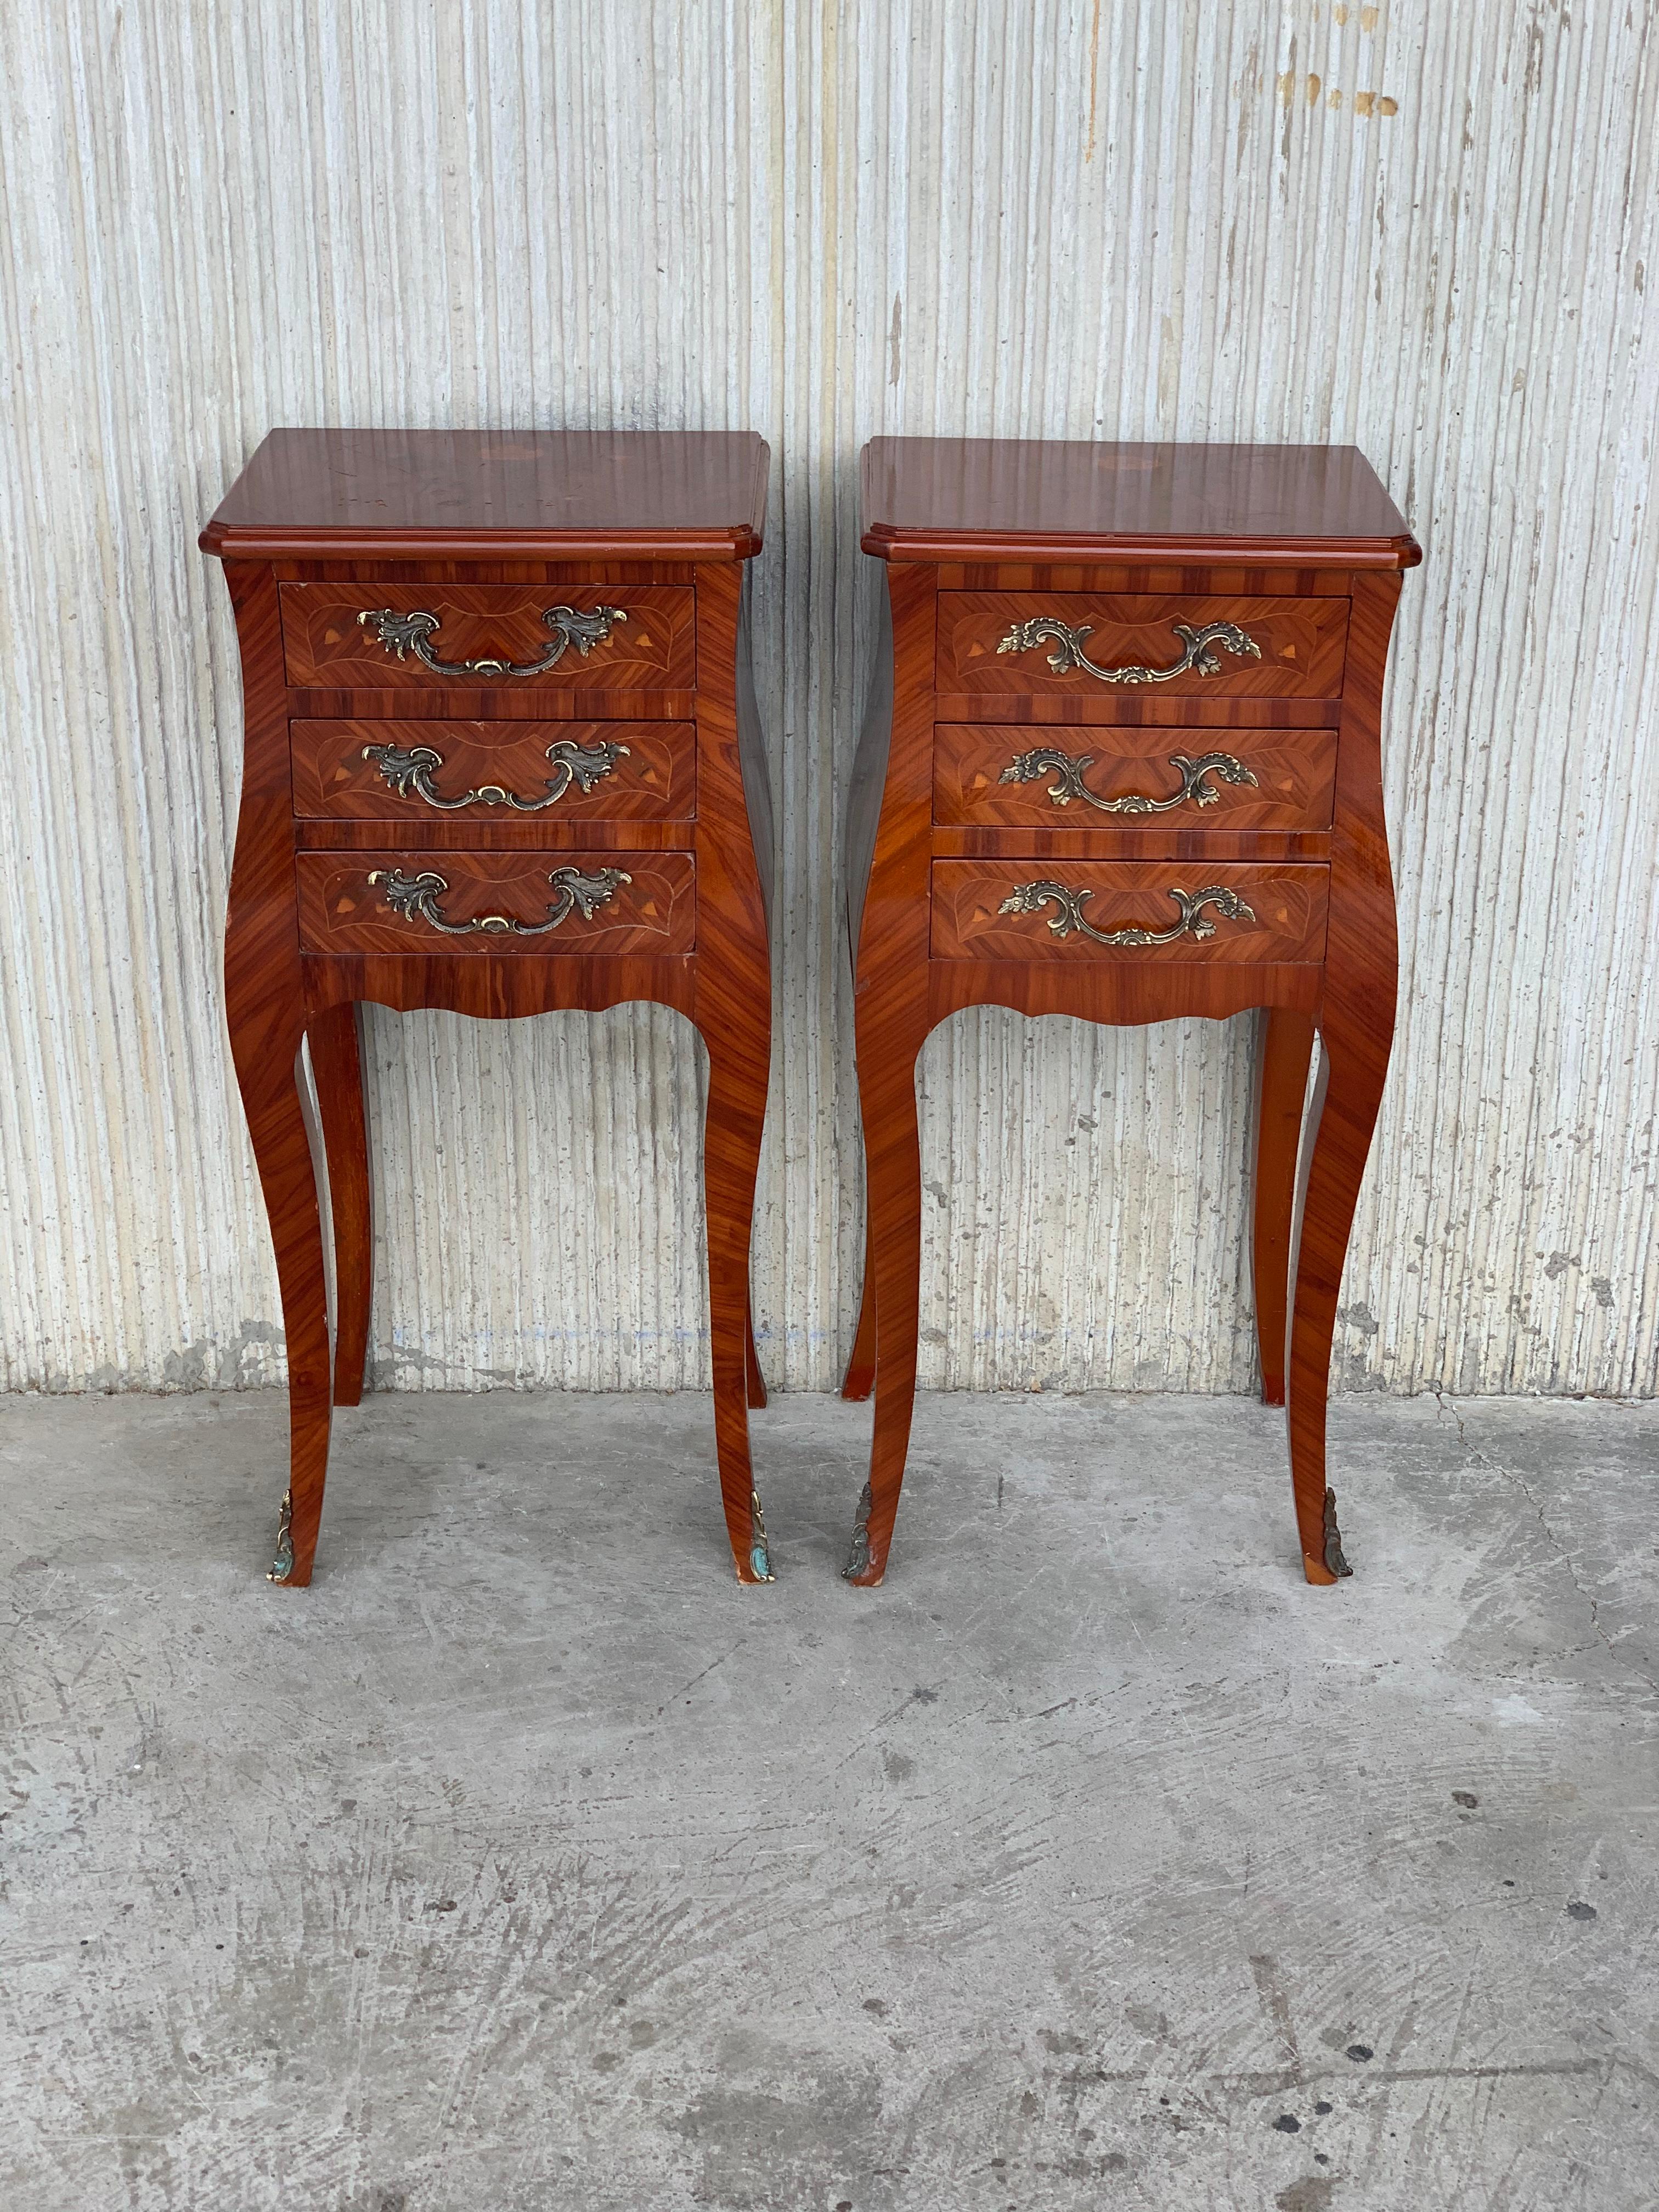 20th Century Louis XV Style Pair of Marquetry Nightstands with Three Drawers & Cabriole Legs